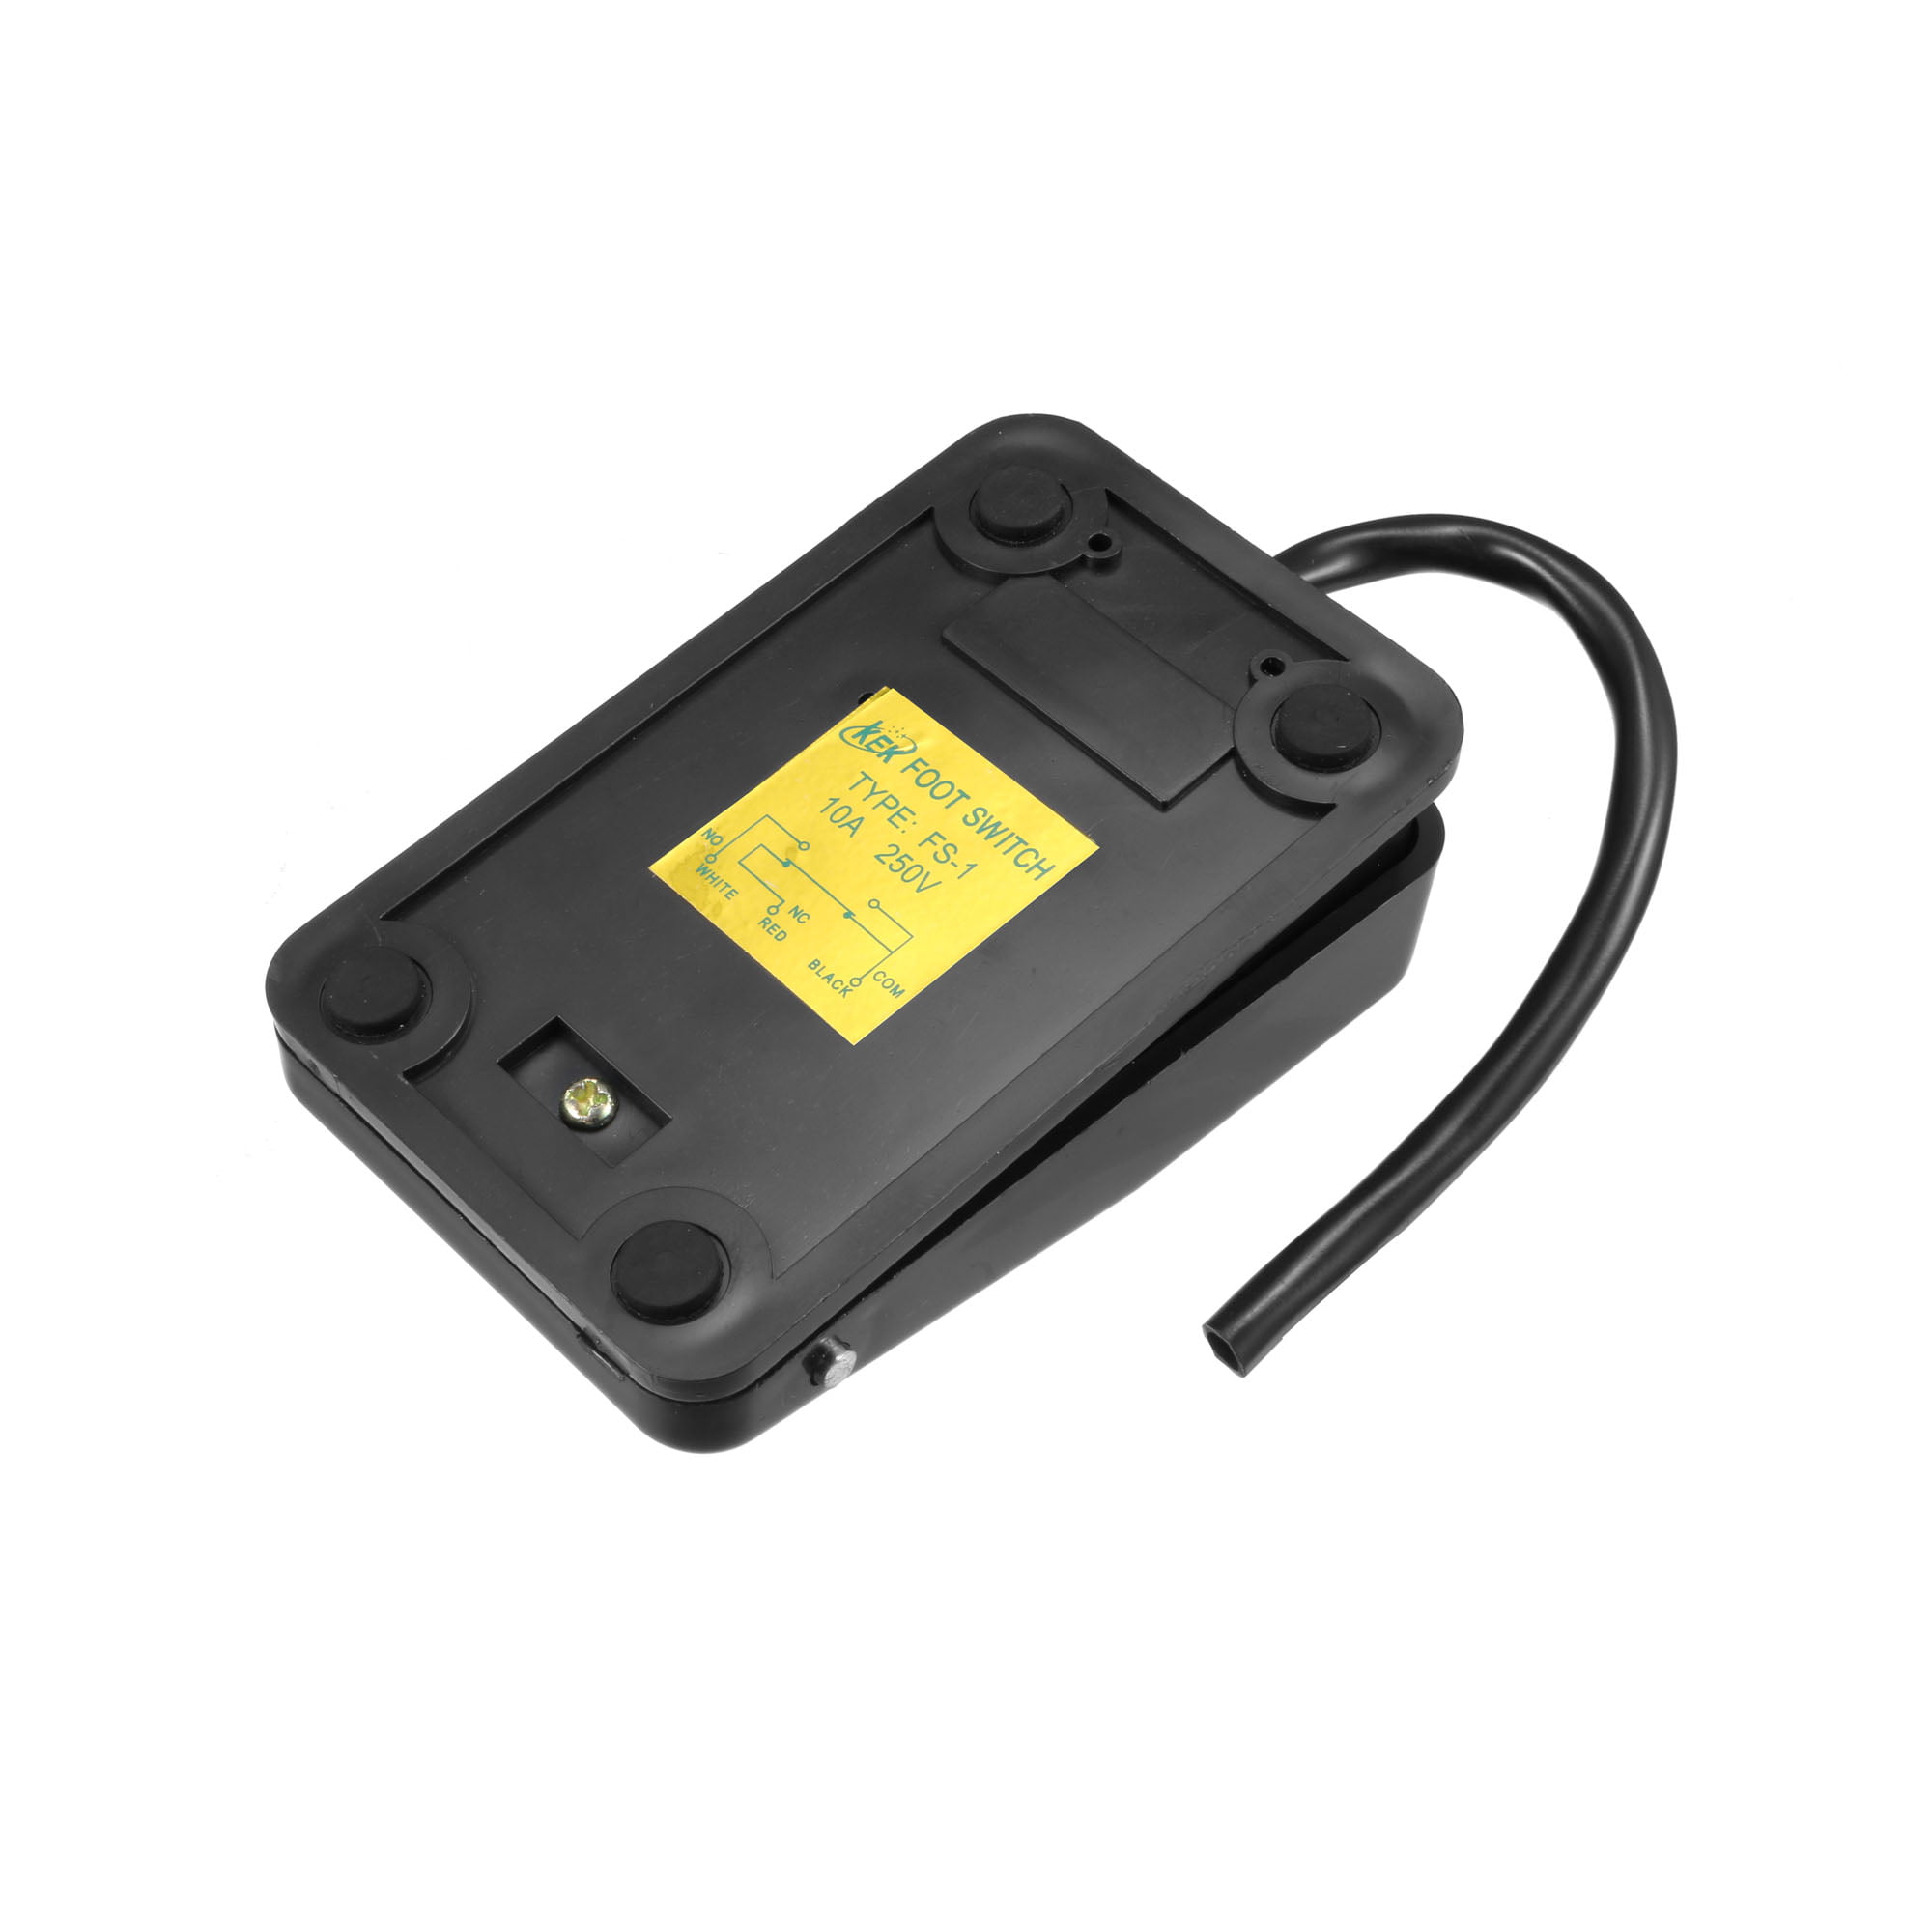 Details about   Momentary Foot Controller Pedal Switch AC220V 10A SPDT Foot Pedal SwitcHFBJ